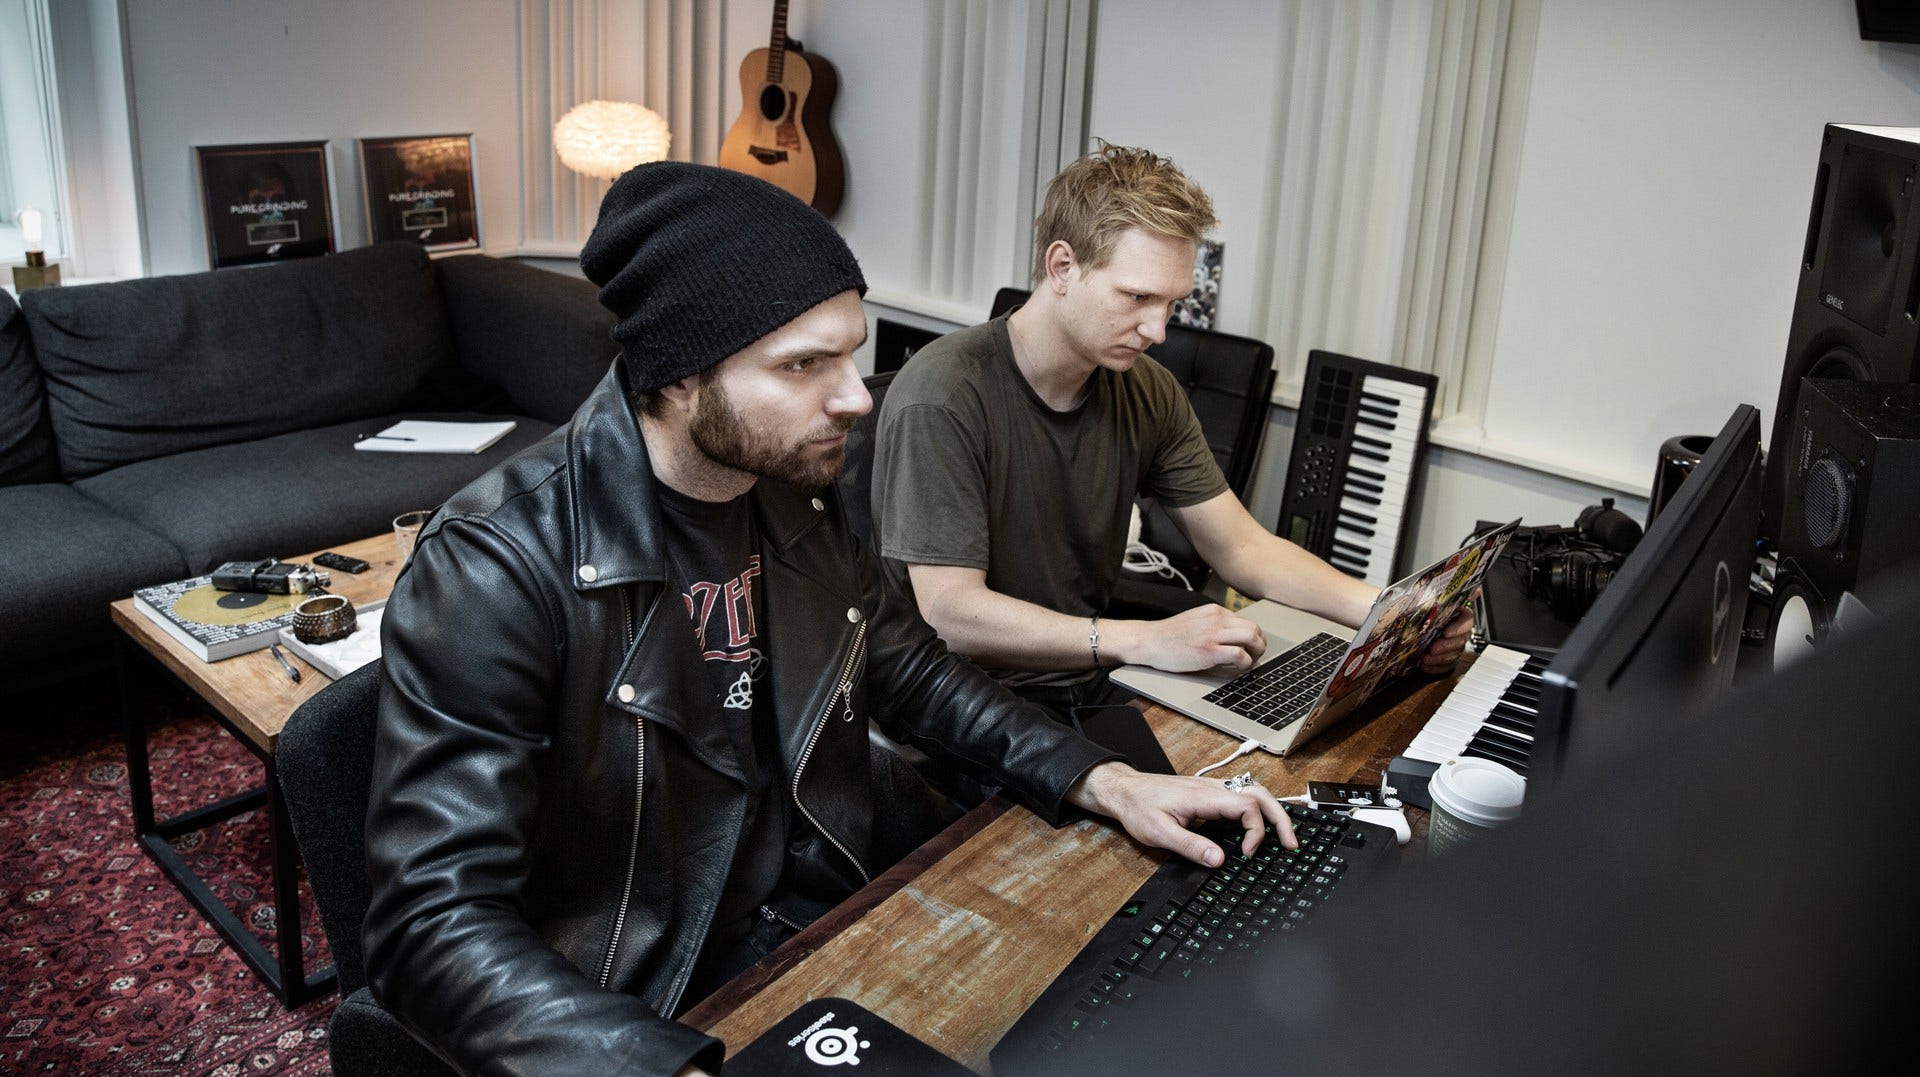 Kristoffer Fogelmark and Albin Nedler stayed behind in the house in Los Angeles while Tim Bergling travelled to Oman.